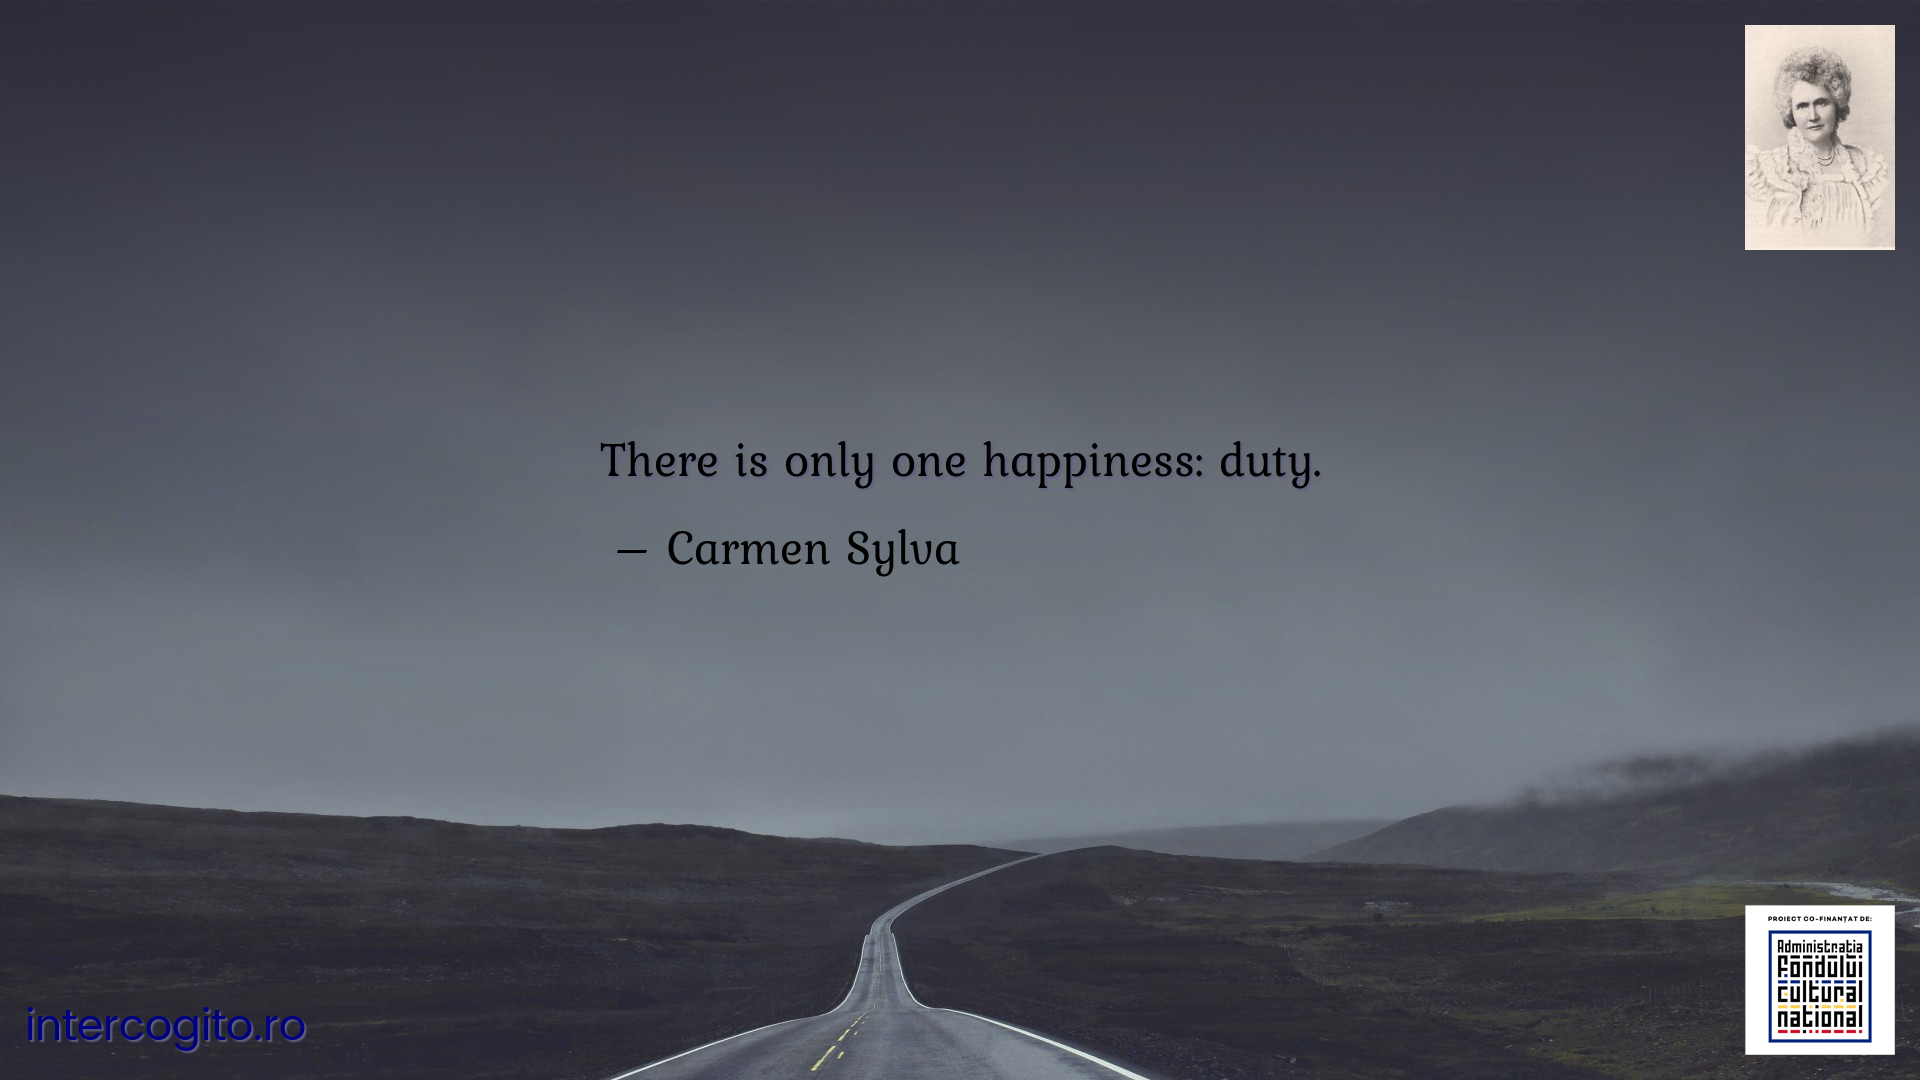 There is only one happiness: duty.